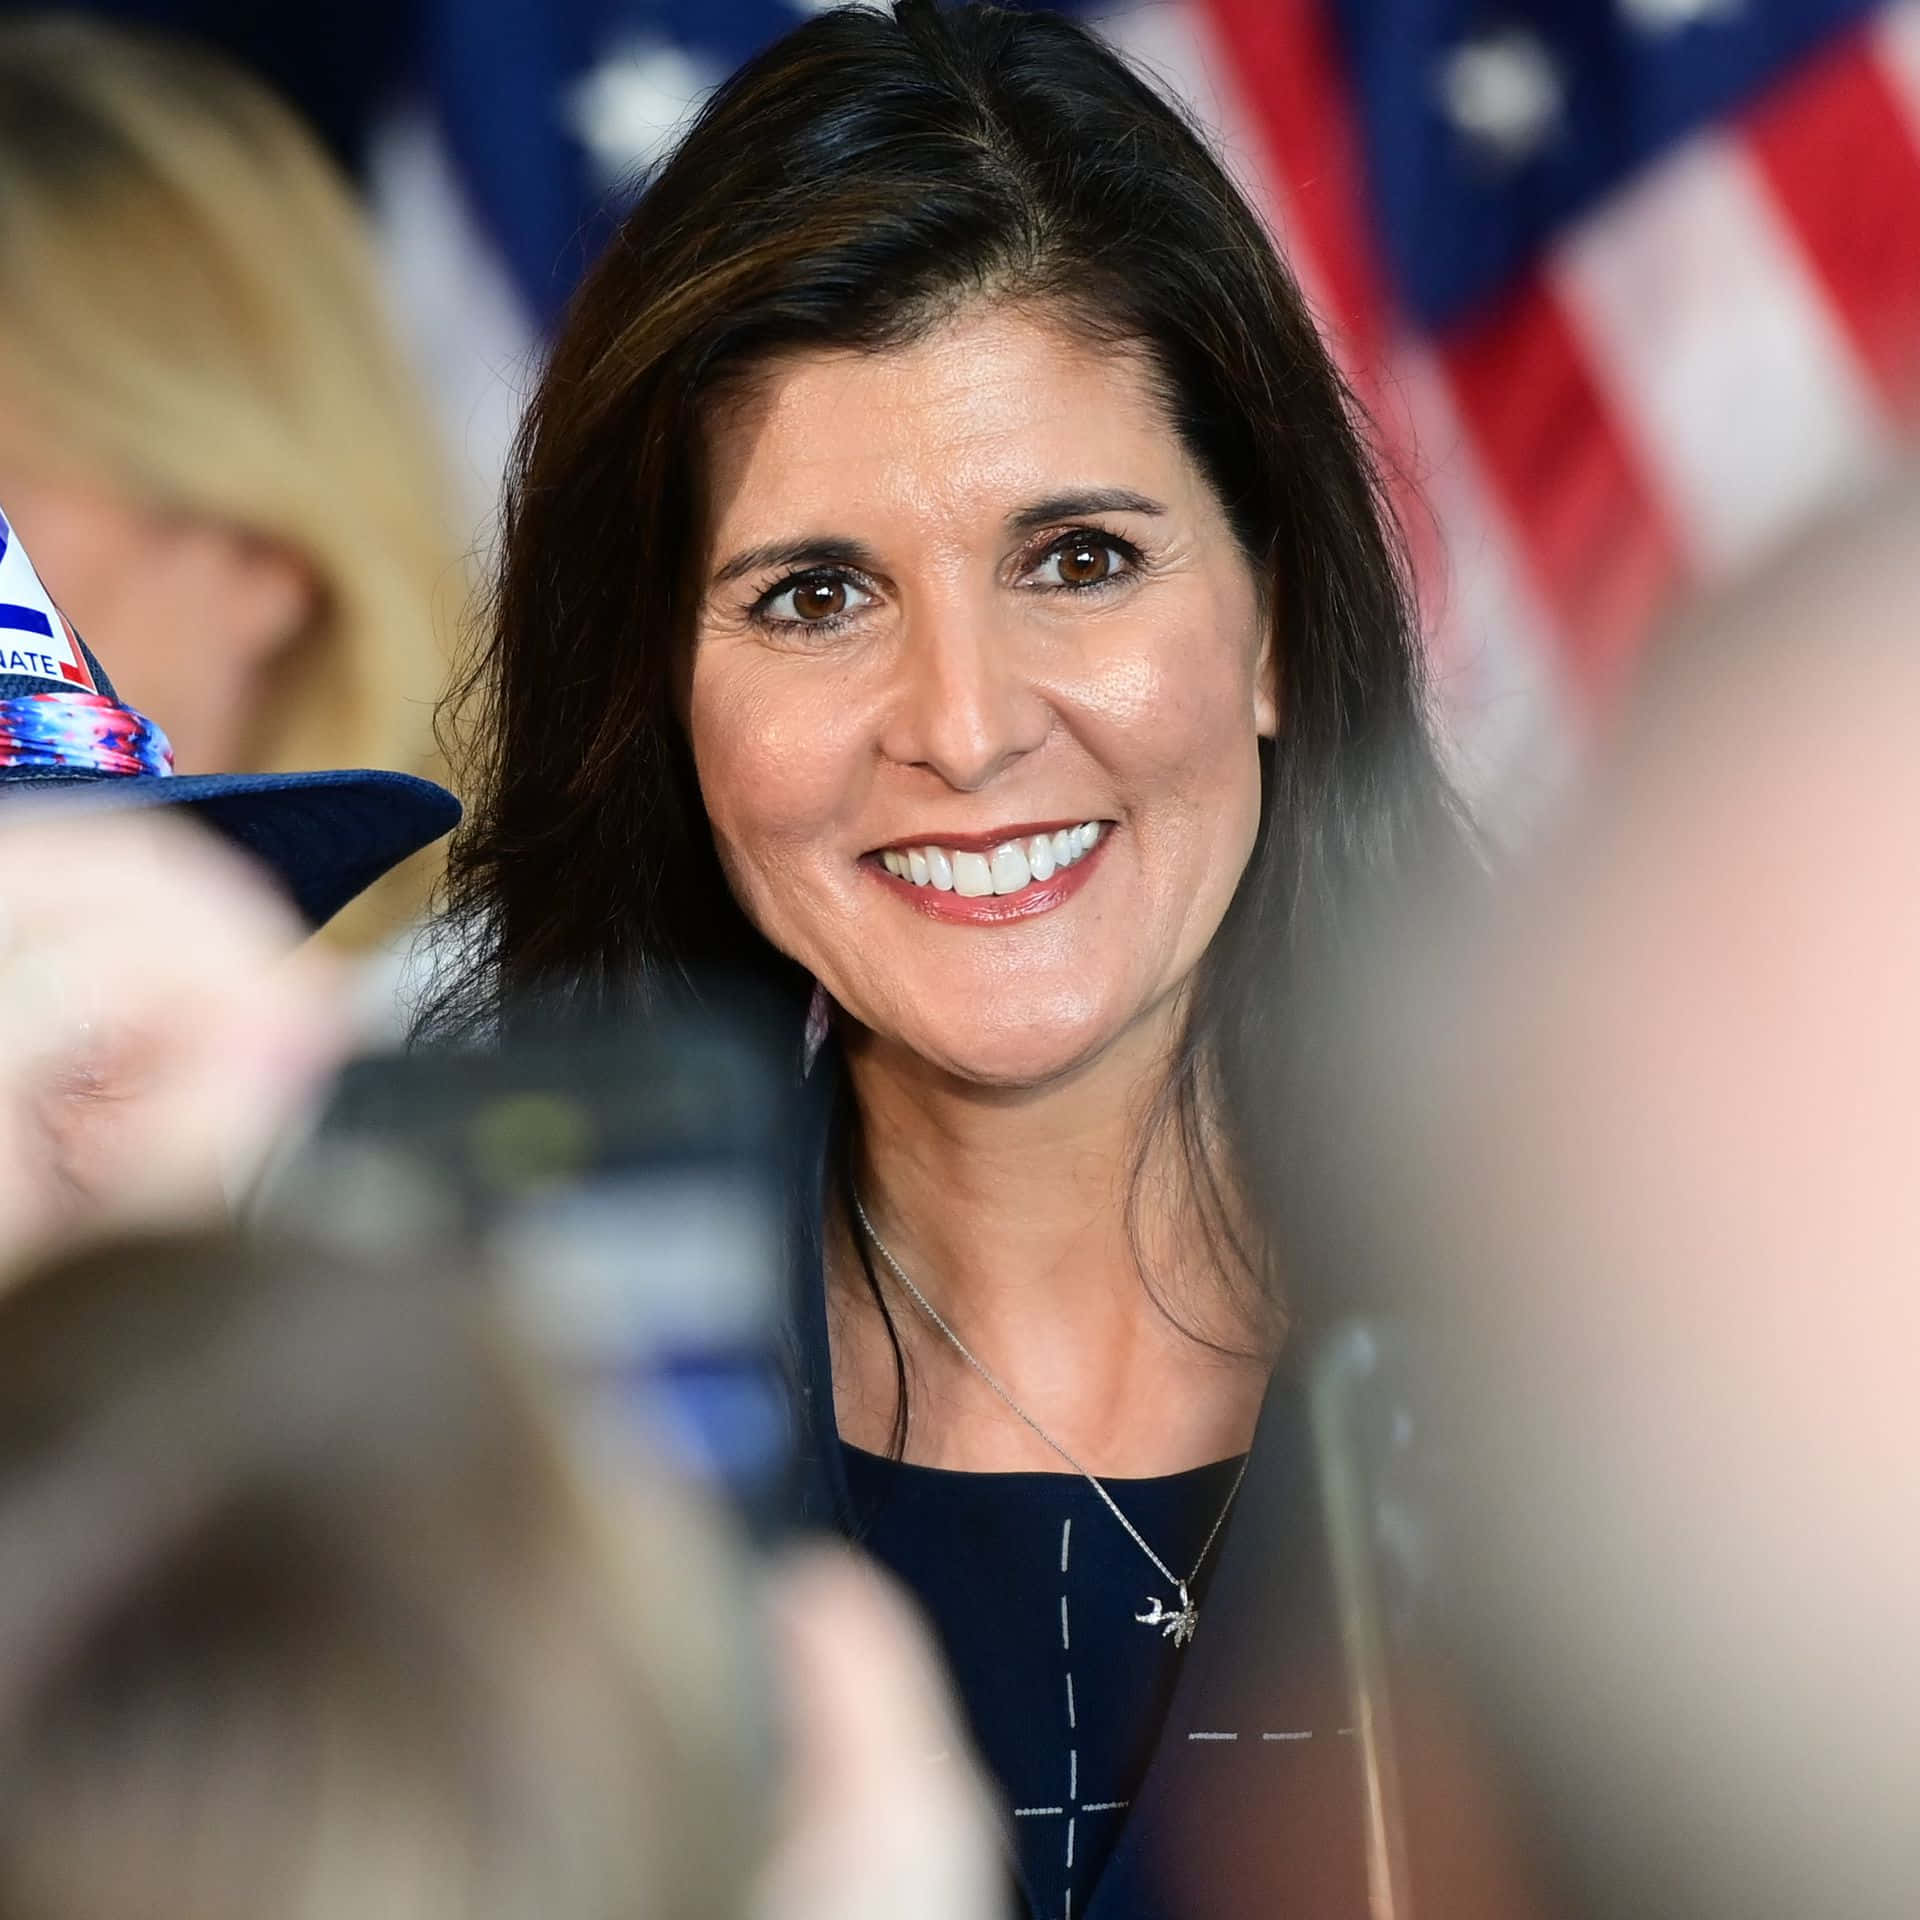 Nikkihaley Ler - (this Translates Directly To 